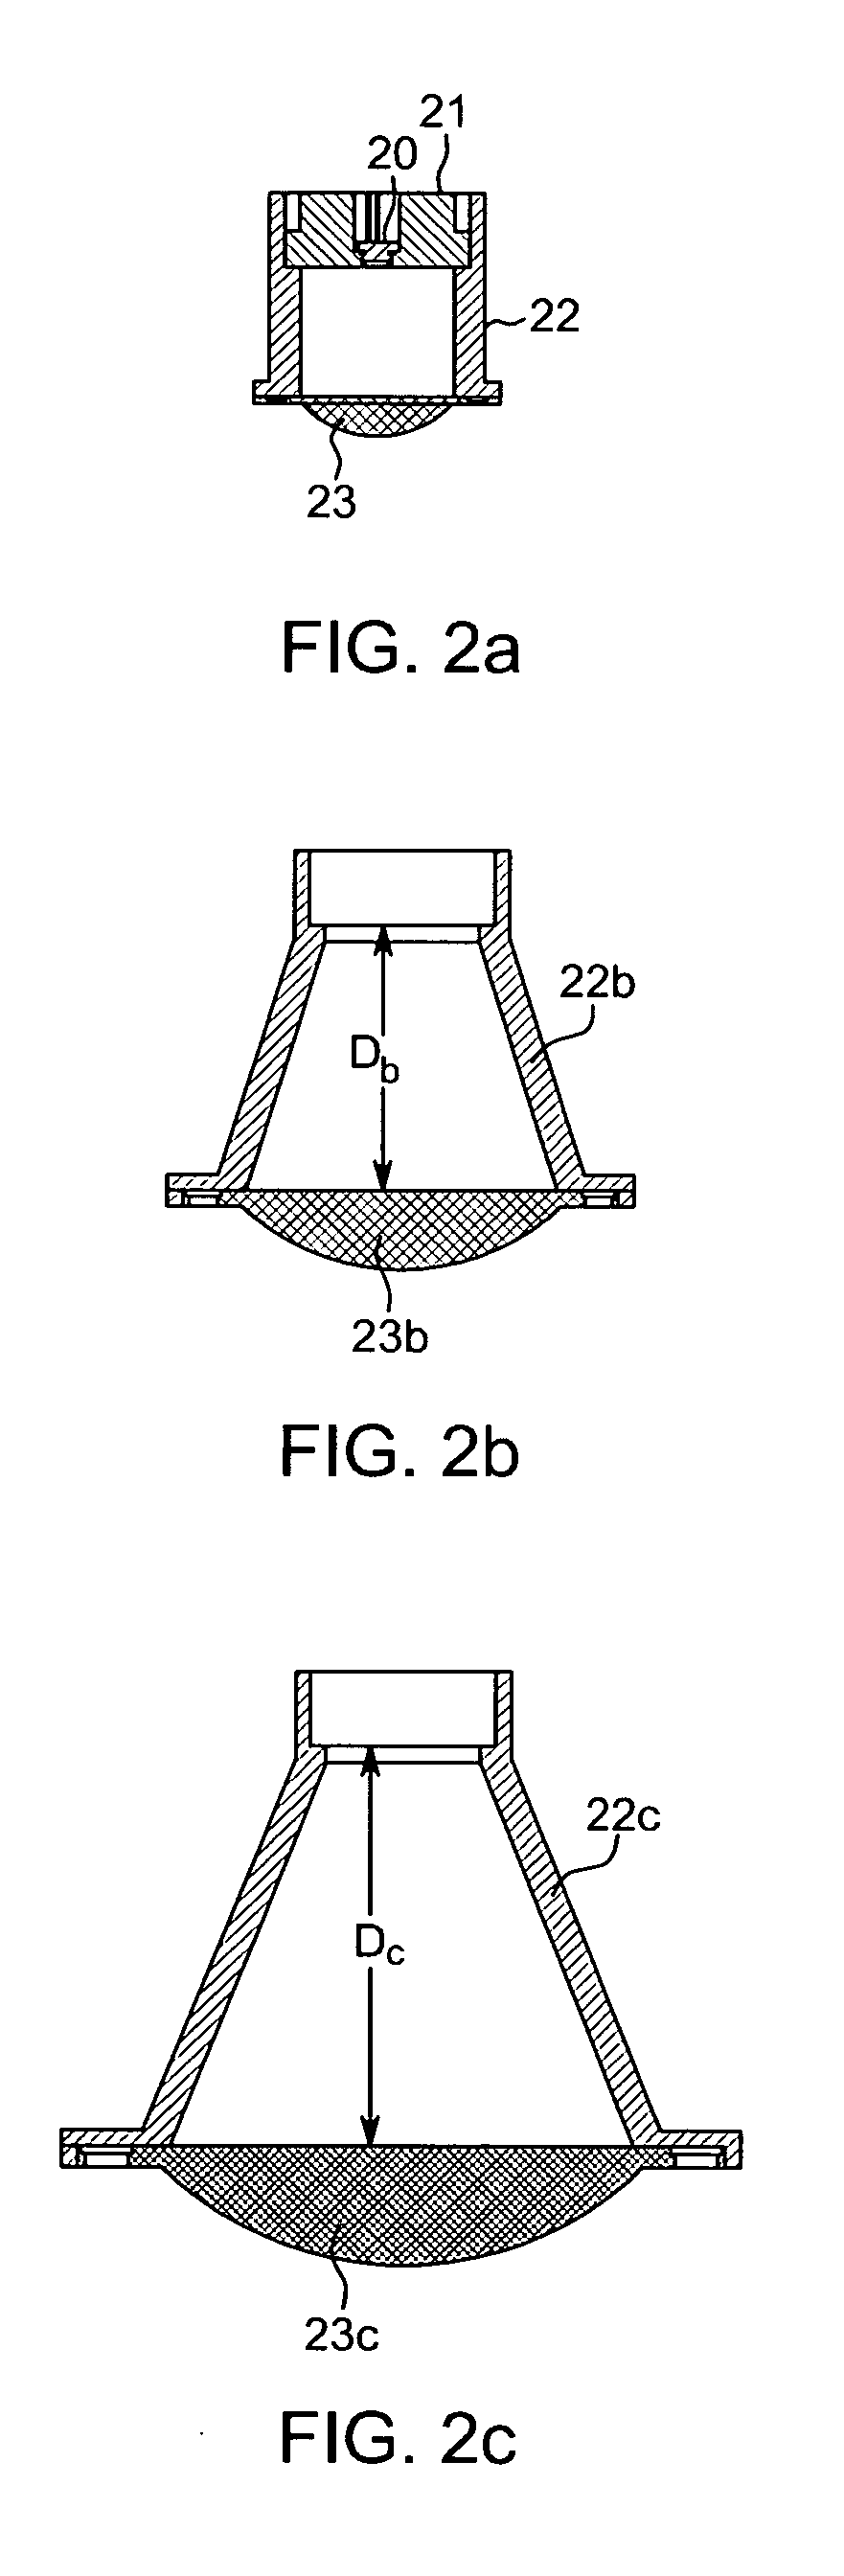 Multiple Aperture Hand-Held Laser Therapy Apparatus